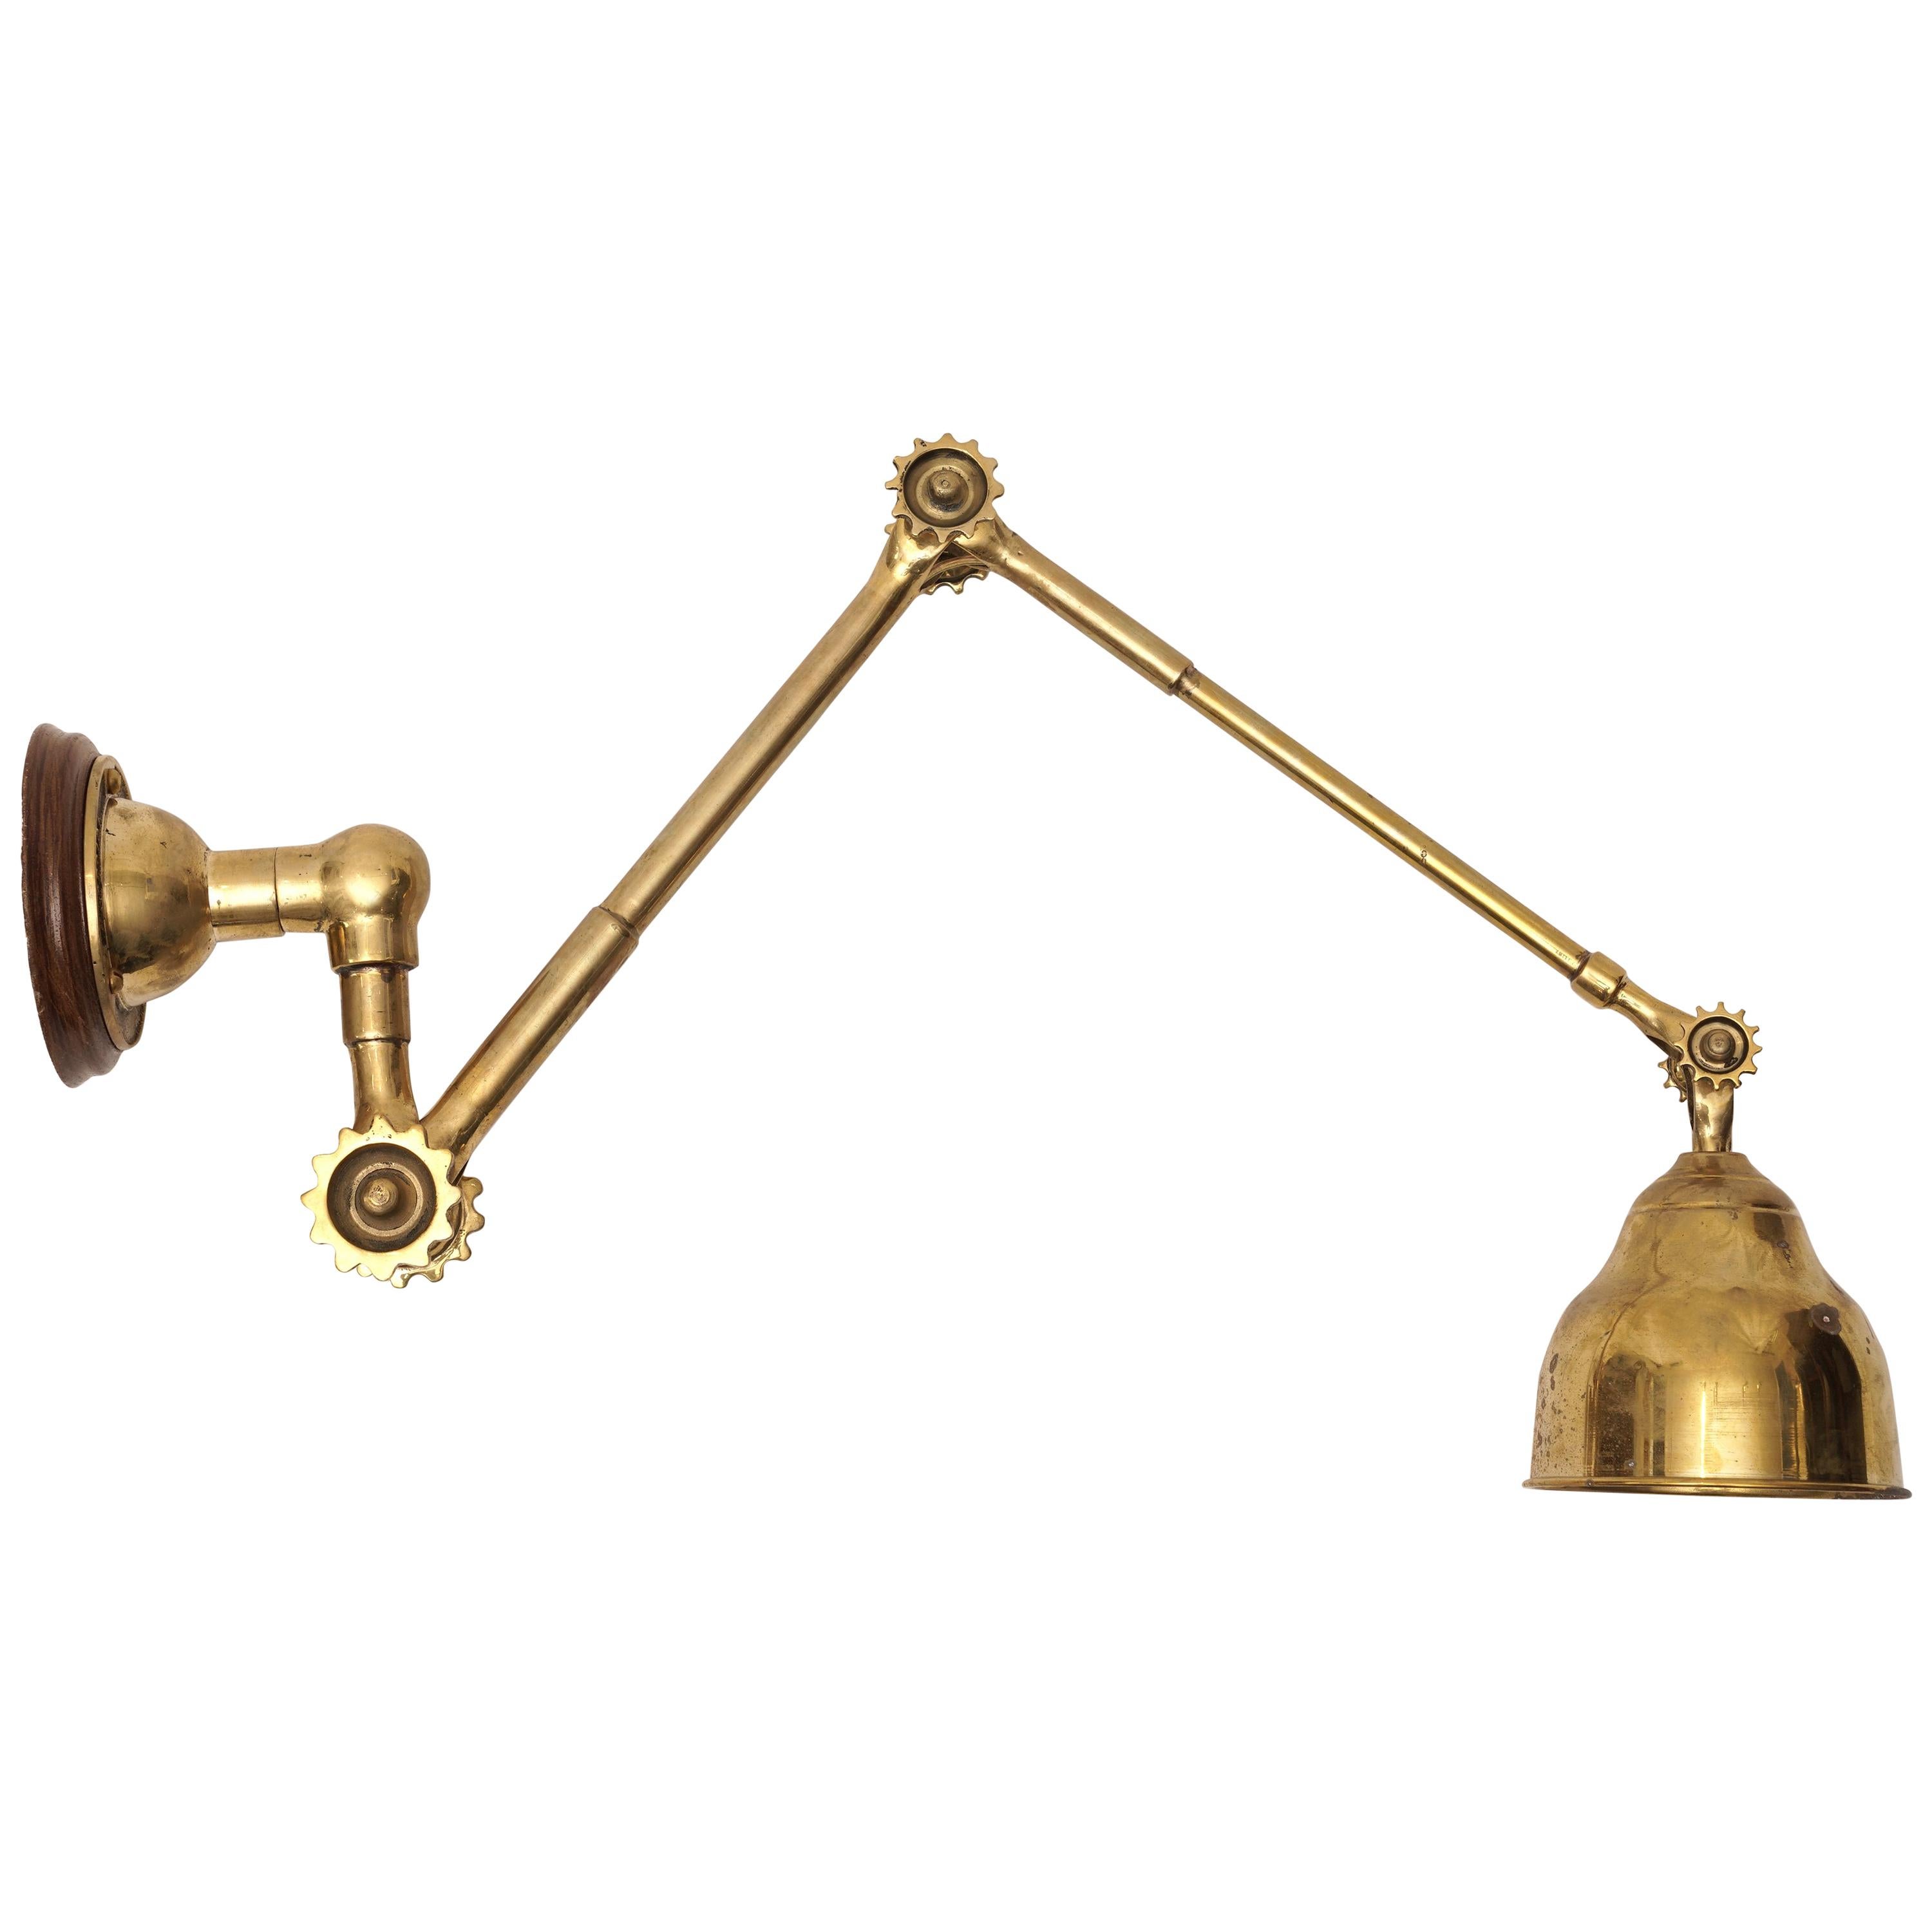 Ship's Adjustable, Swing-Out Brass Wall Light, Pair Available